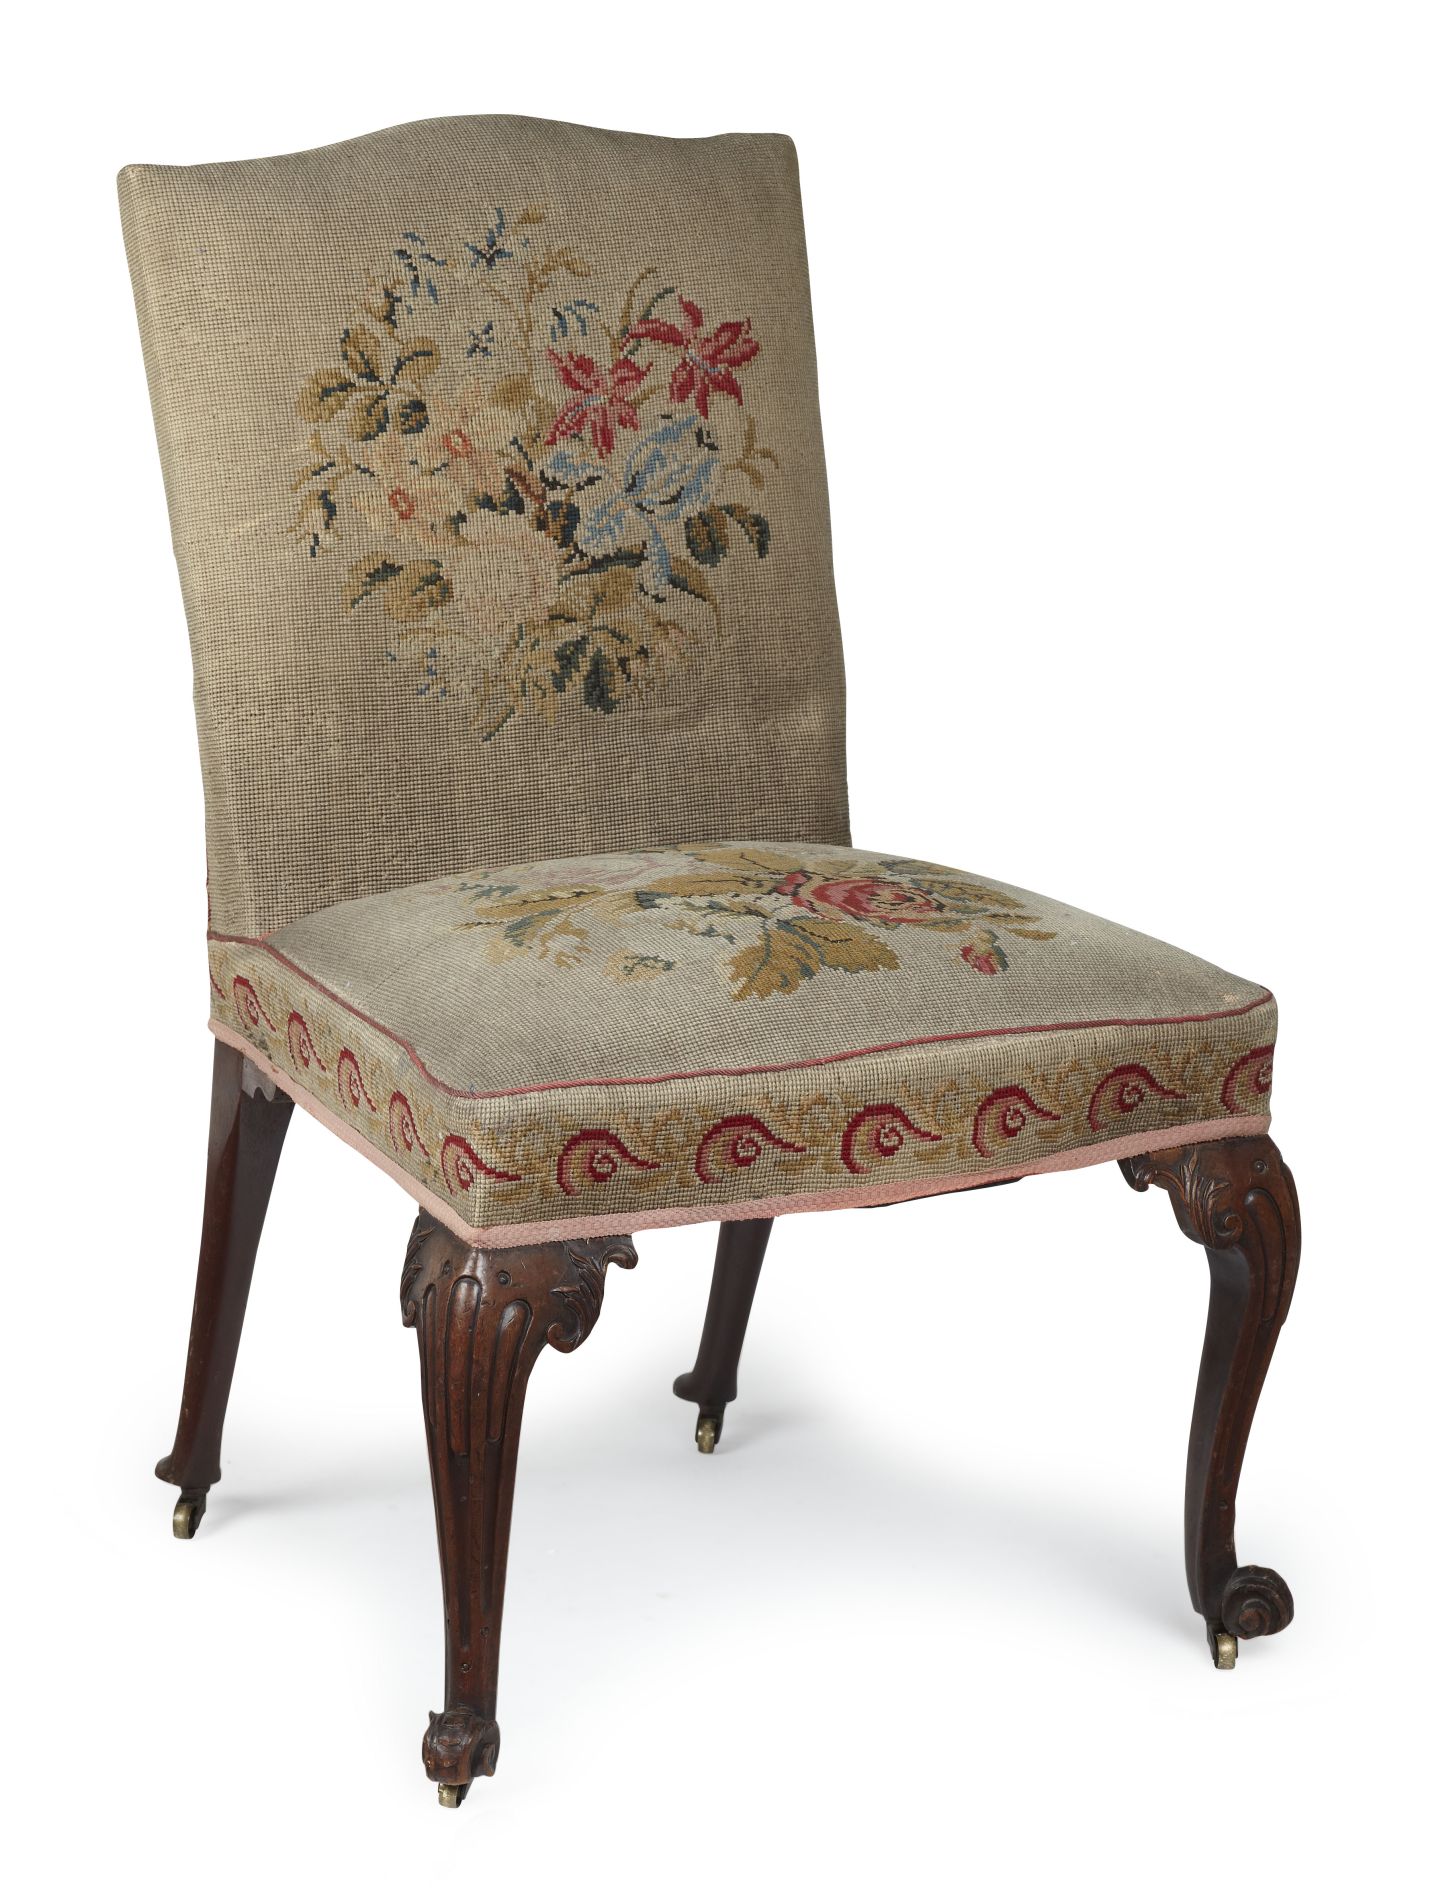 GEORGE II MAHOGANY AND UPHOLSTERED SIDE CHAIR MID 18TH CENTURY the square back and stuffed over seat